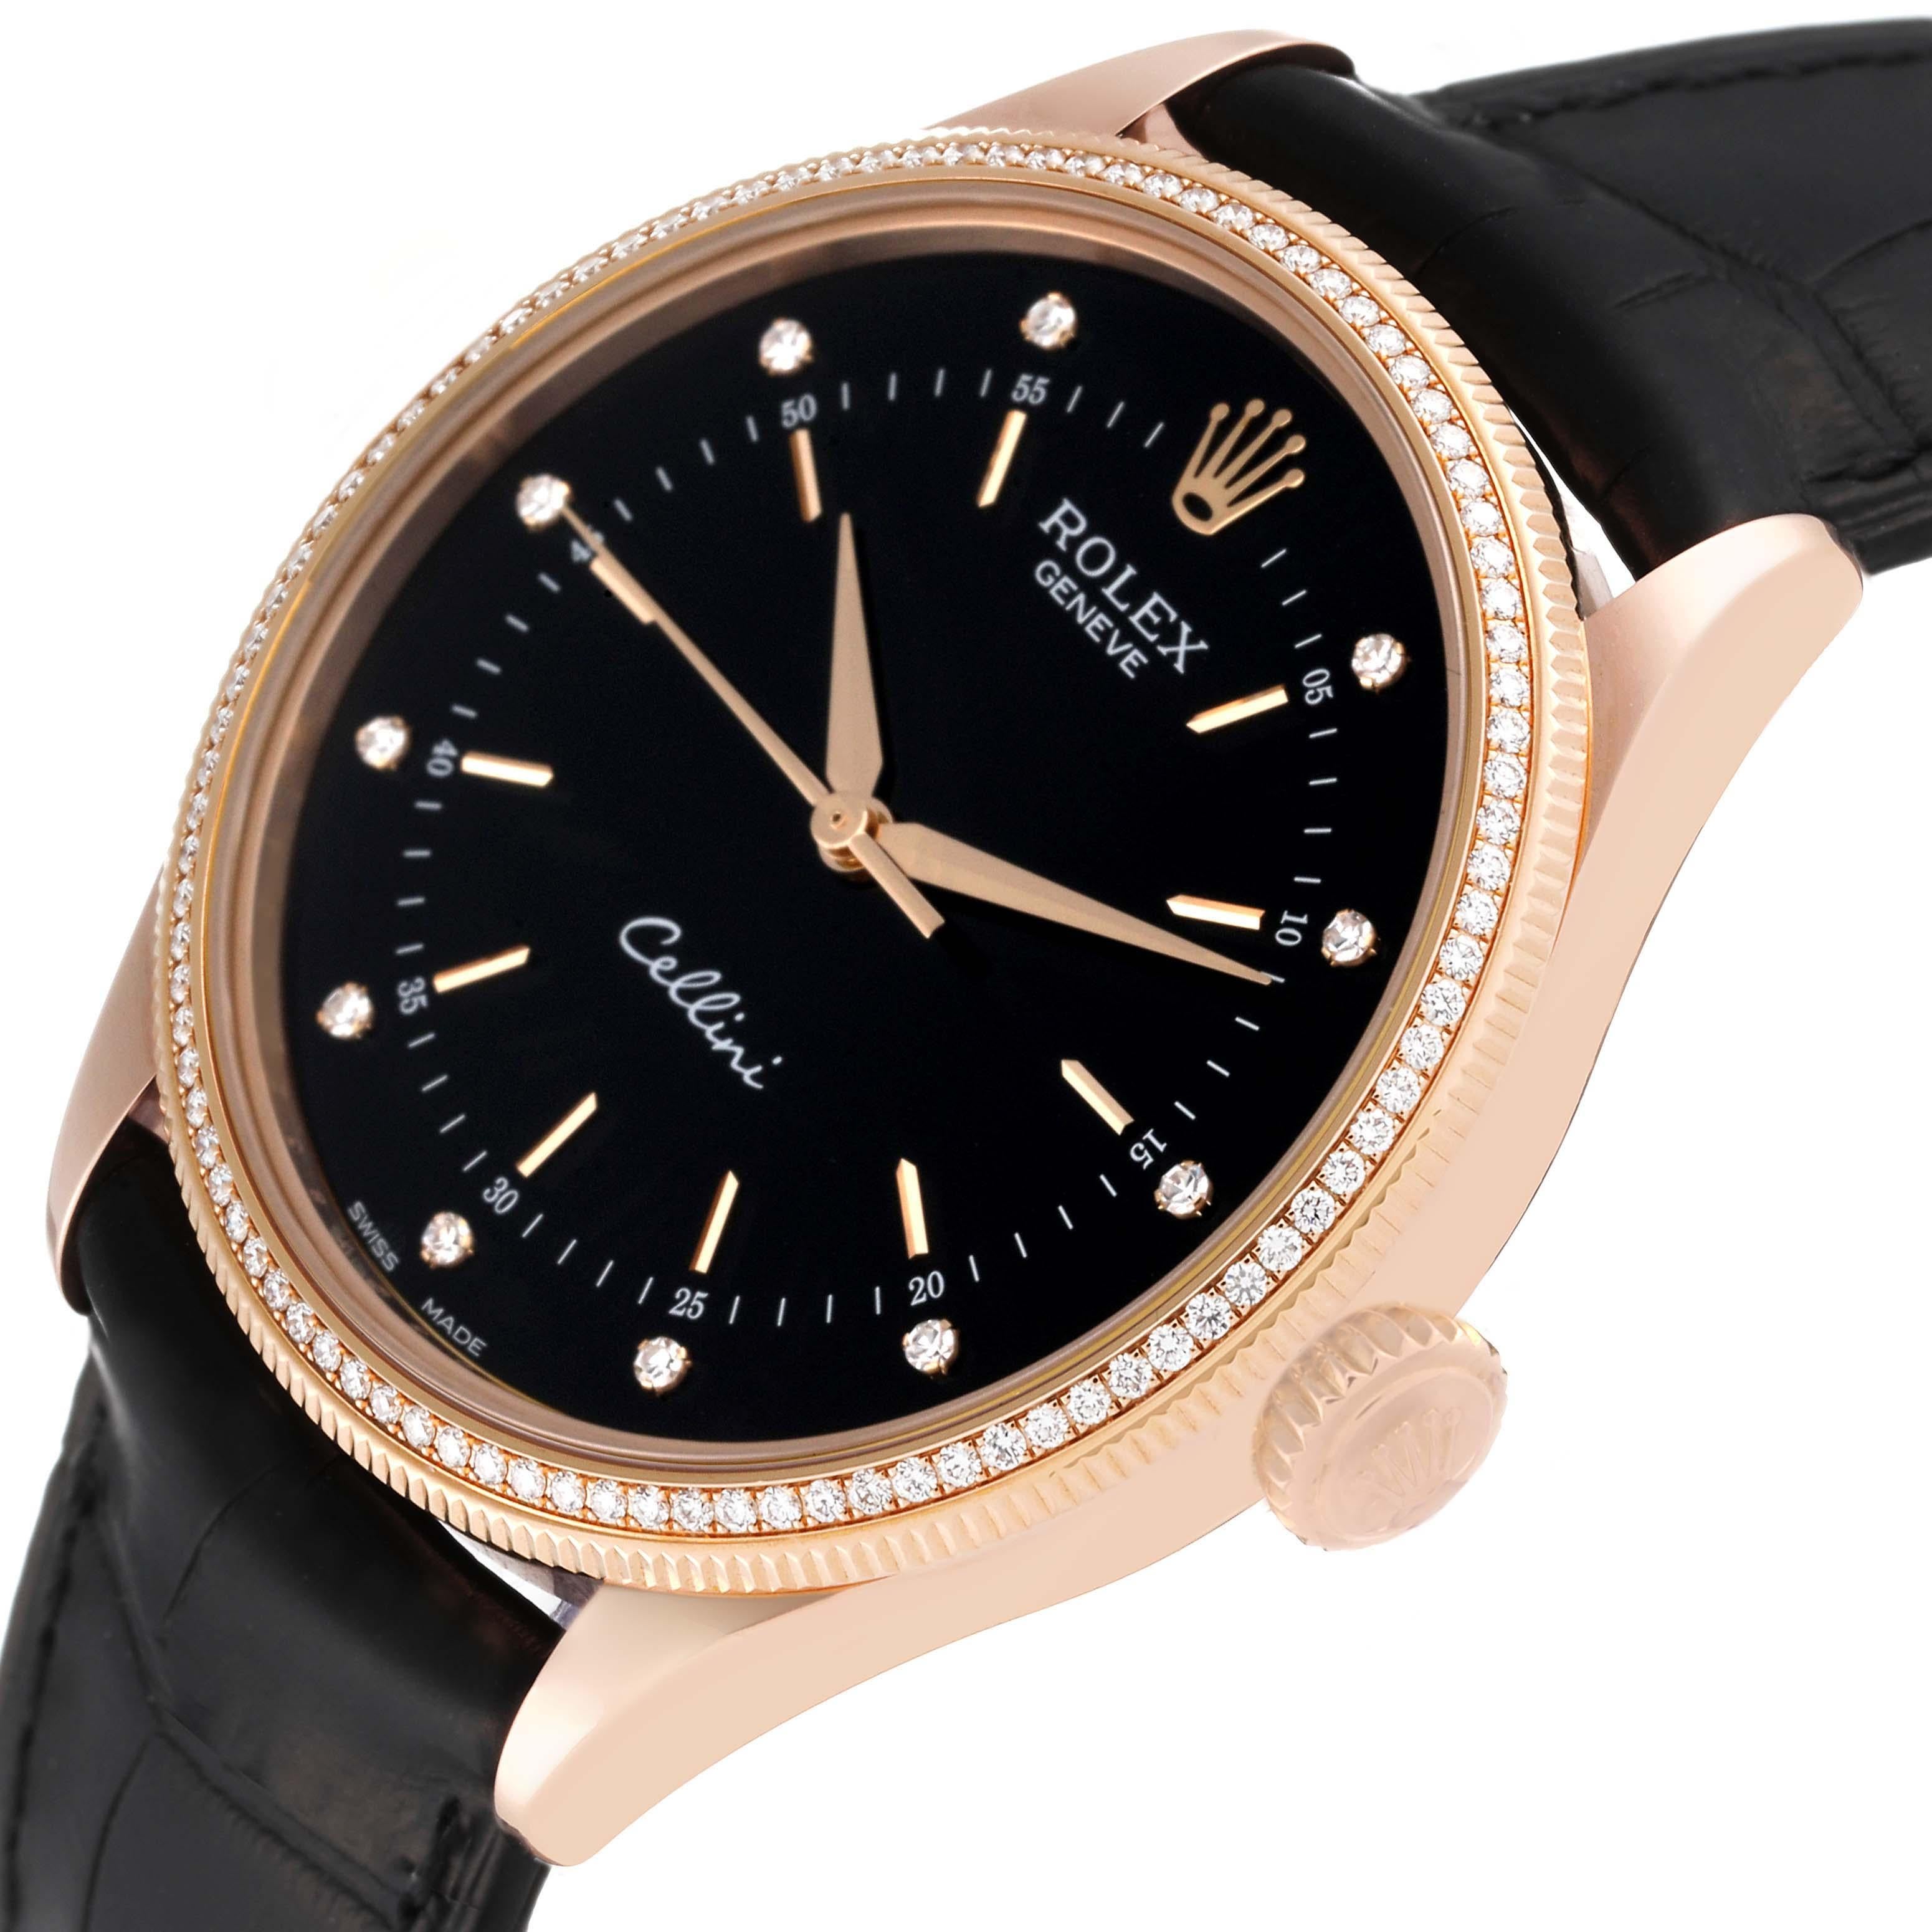 Rolex Cellini Time Rose Gold Black Dial Diamond Mens Watch 50605 Box Card For Sale 1